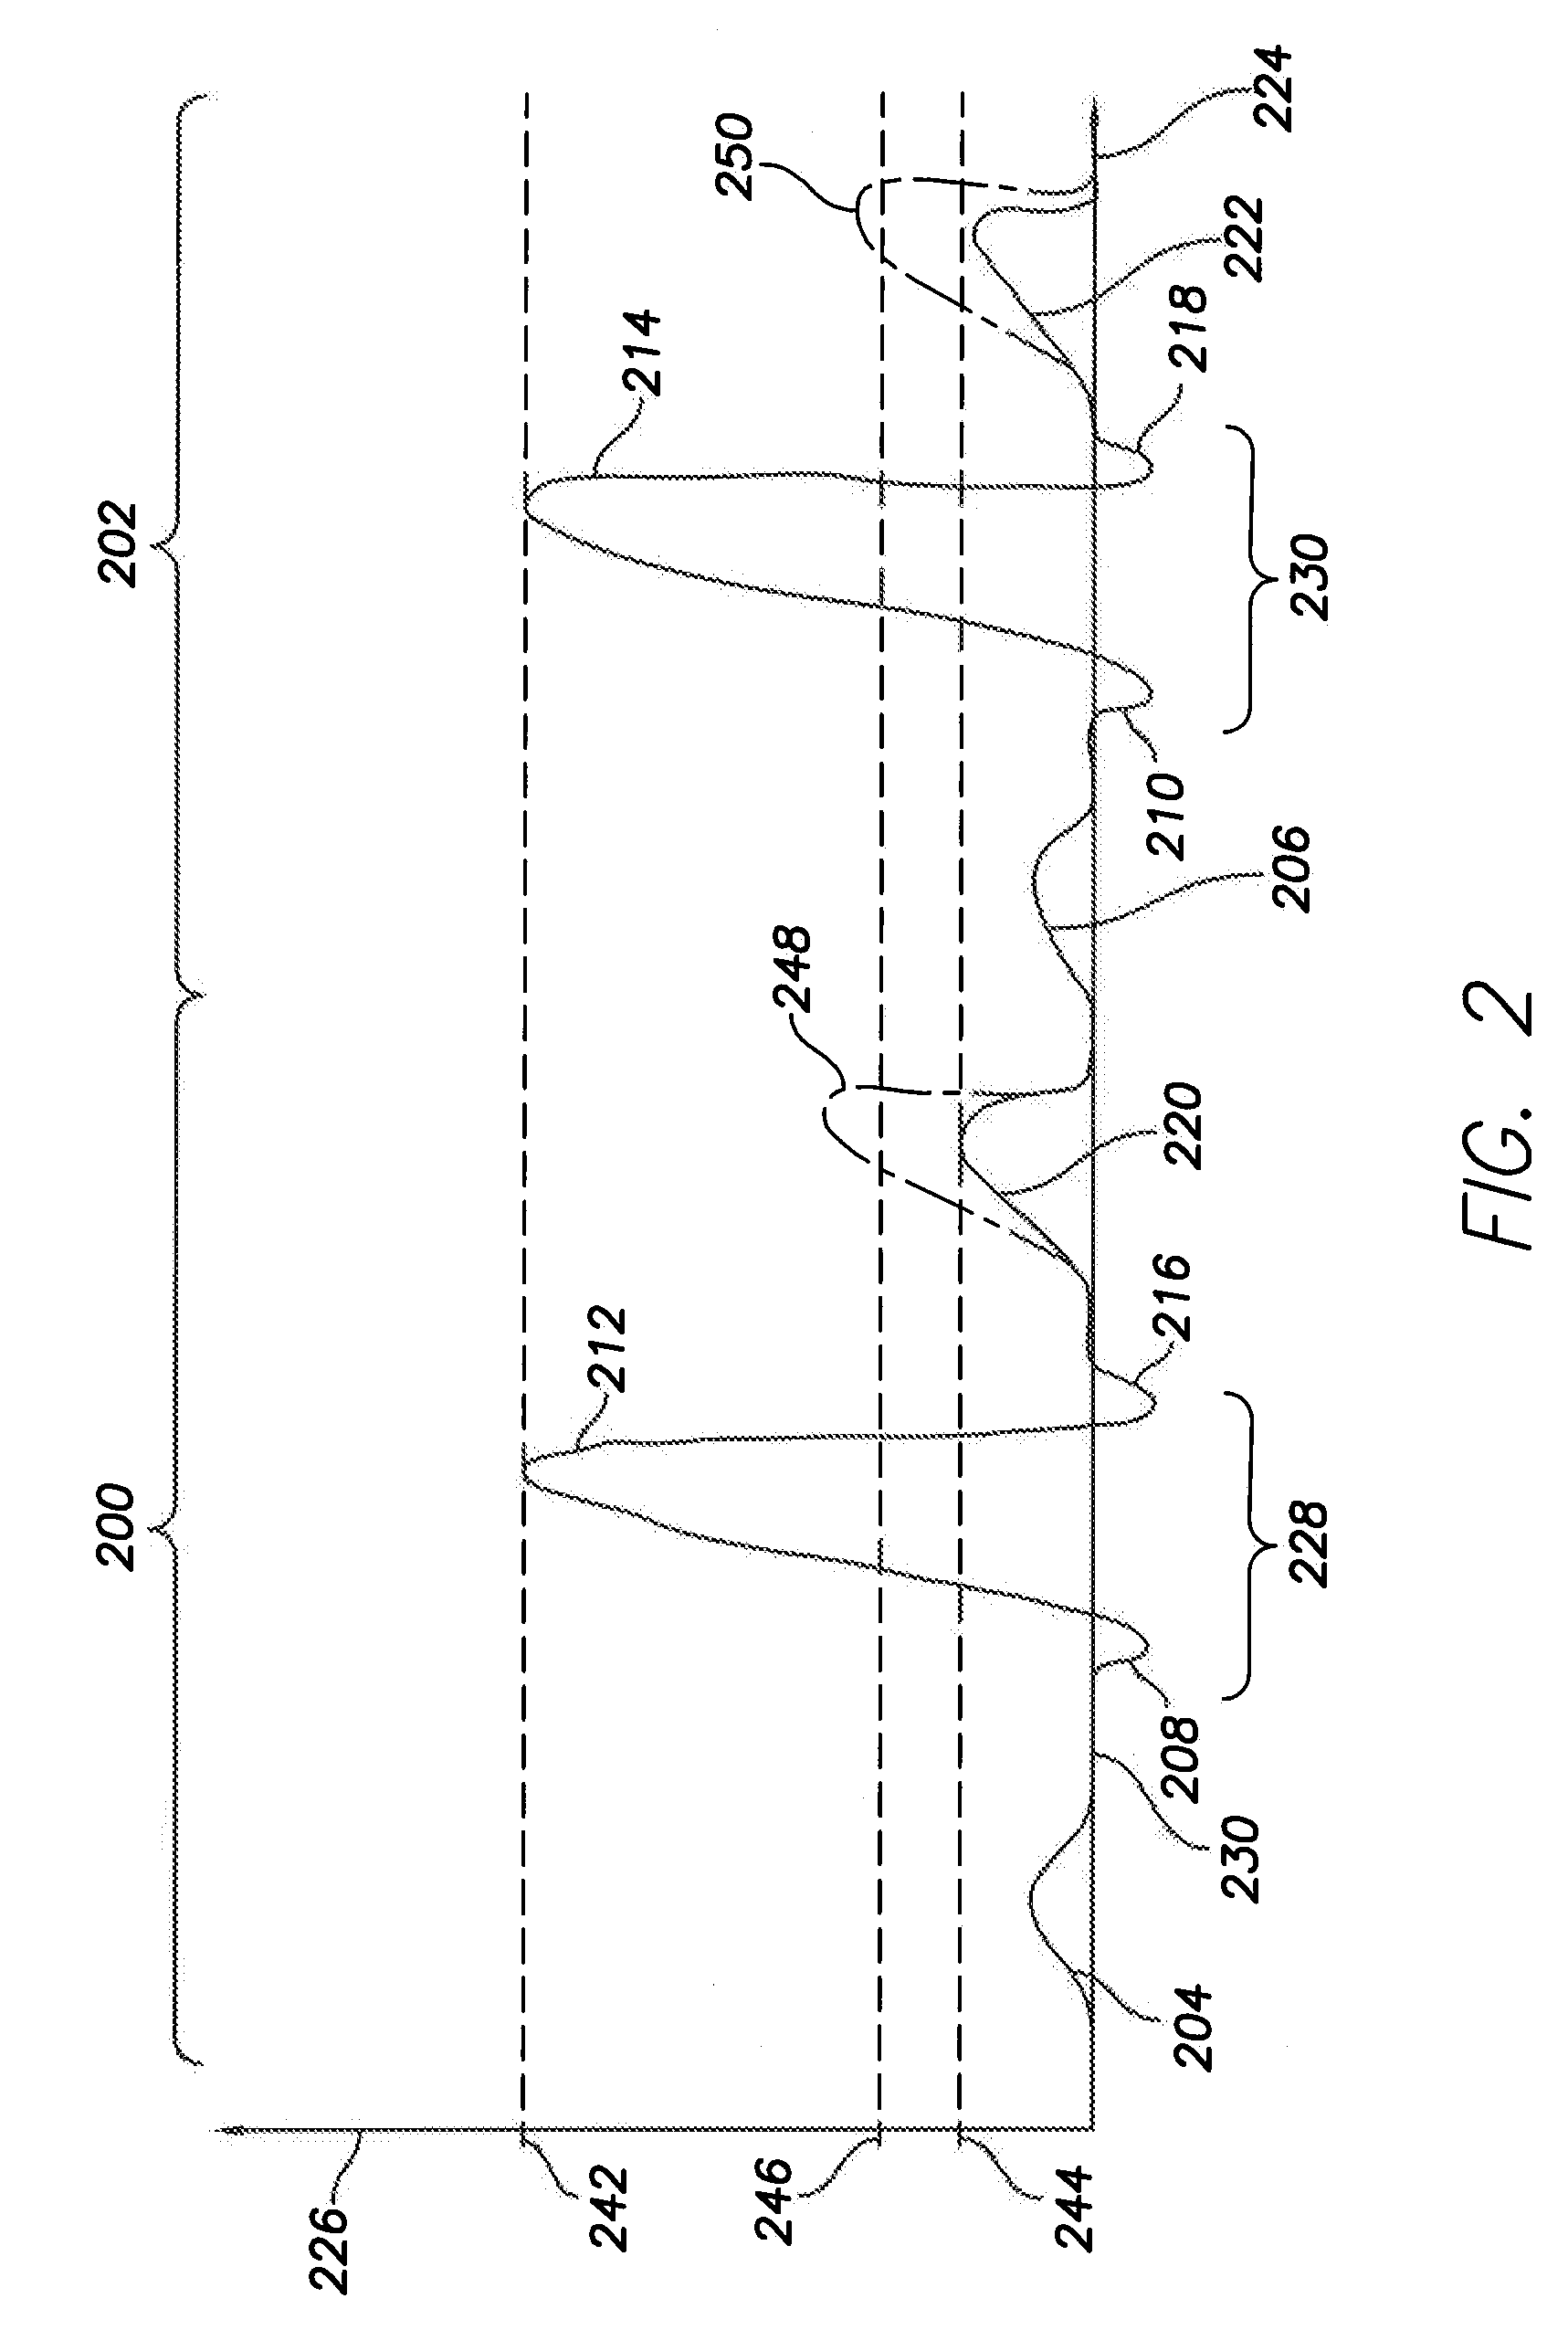 Methods and Systems for Discriminating Between Ventricular Waveforms When Ventricular Rate Exceeds Atrial Rate